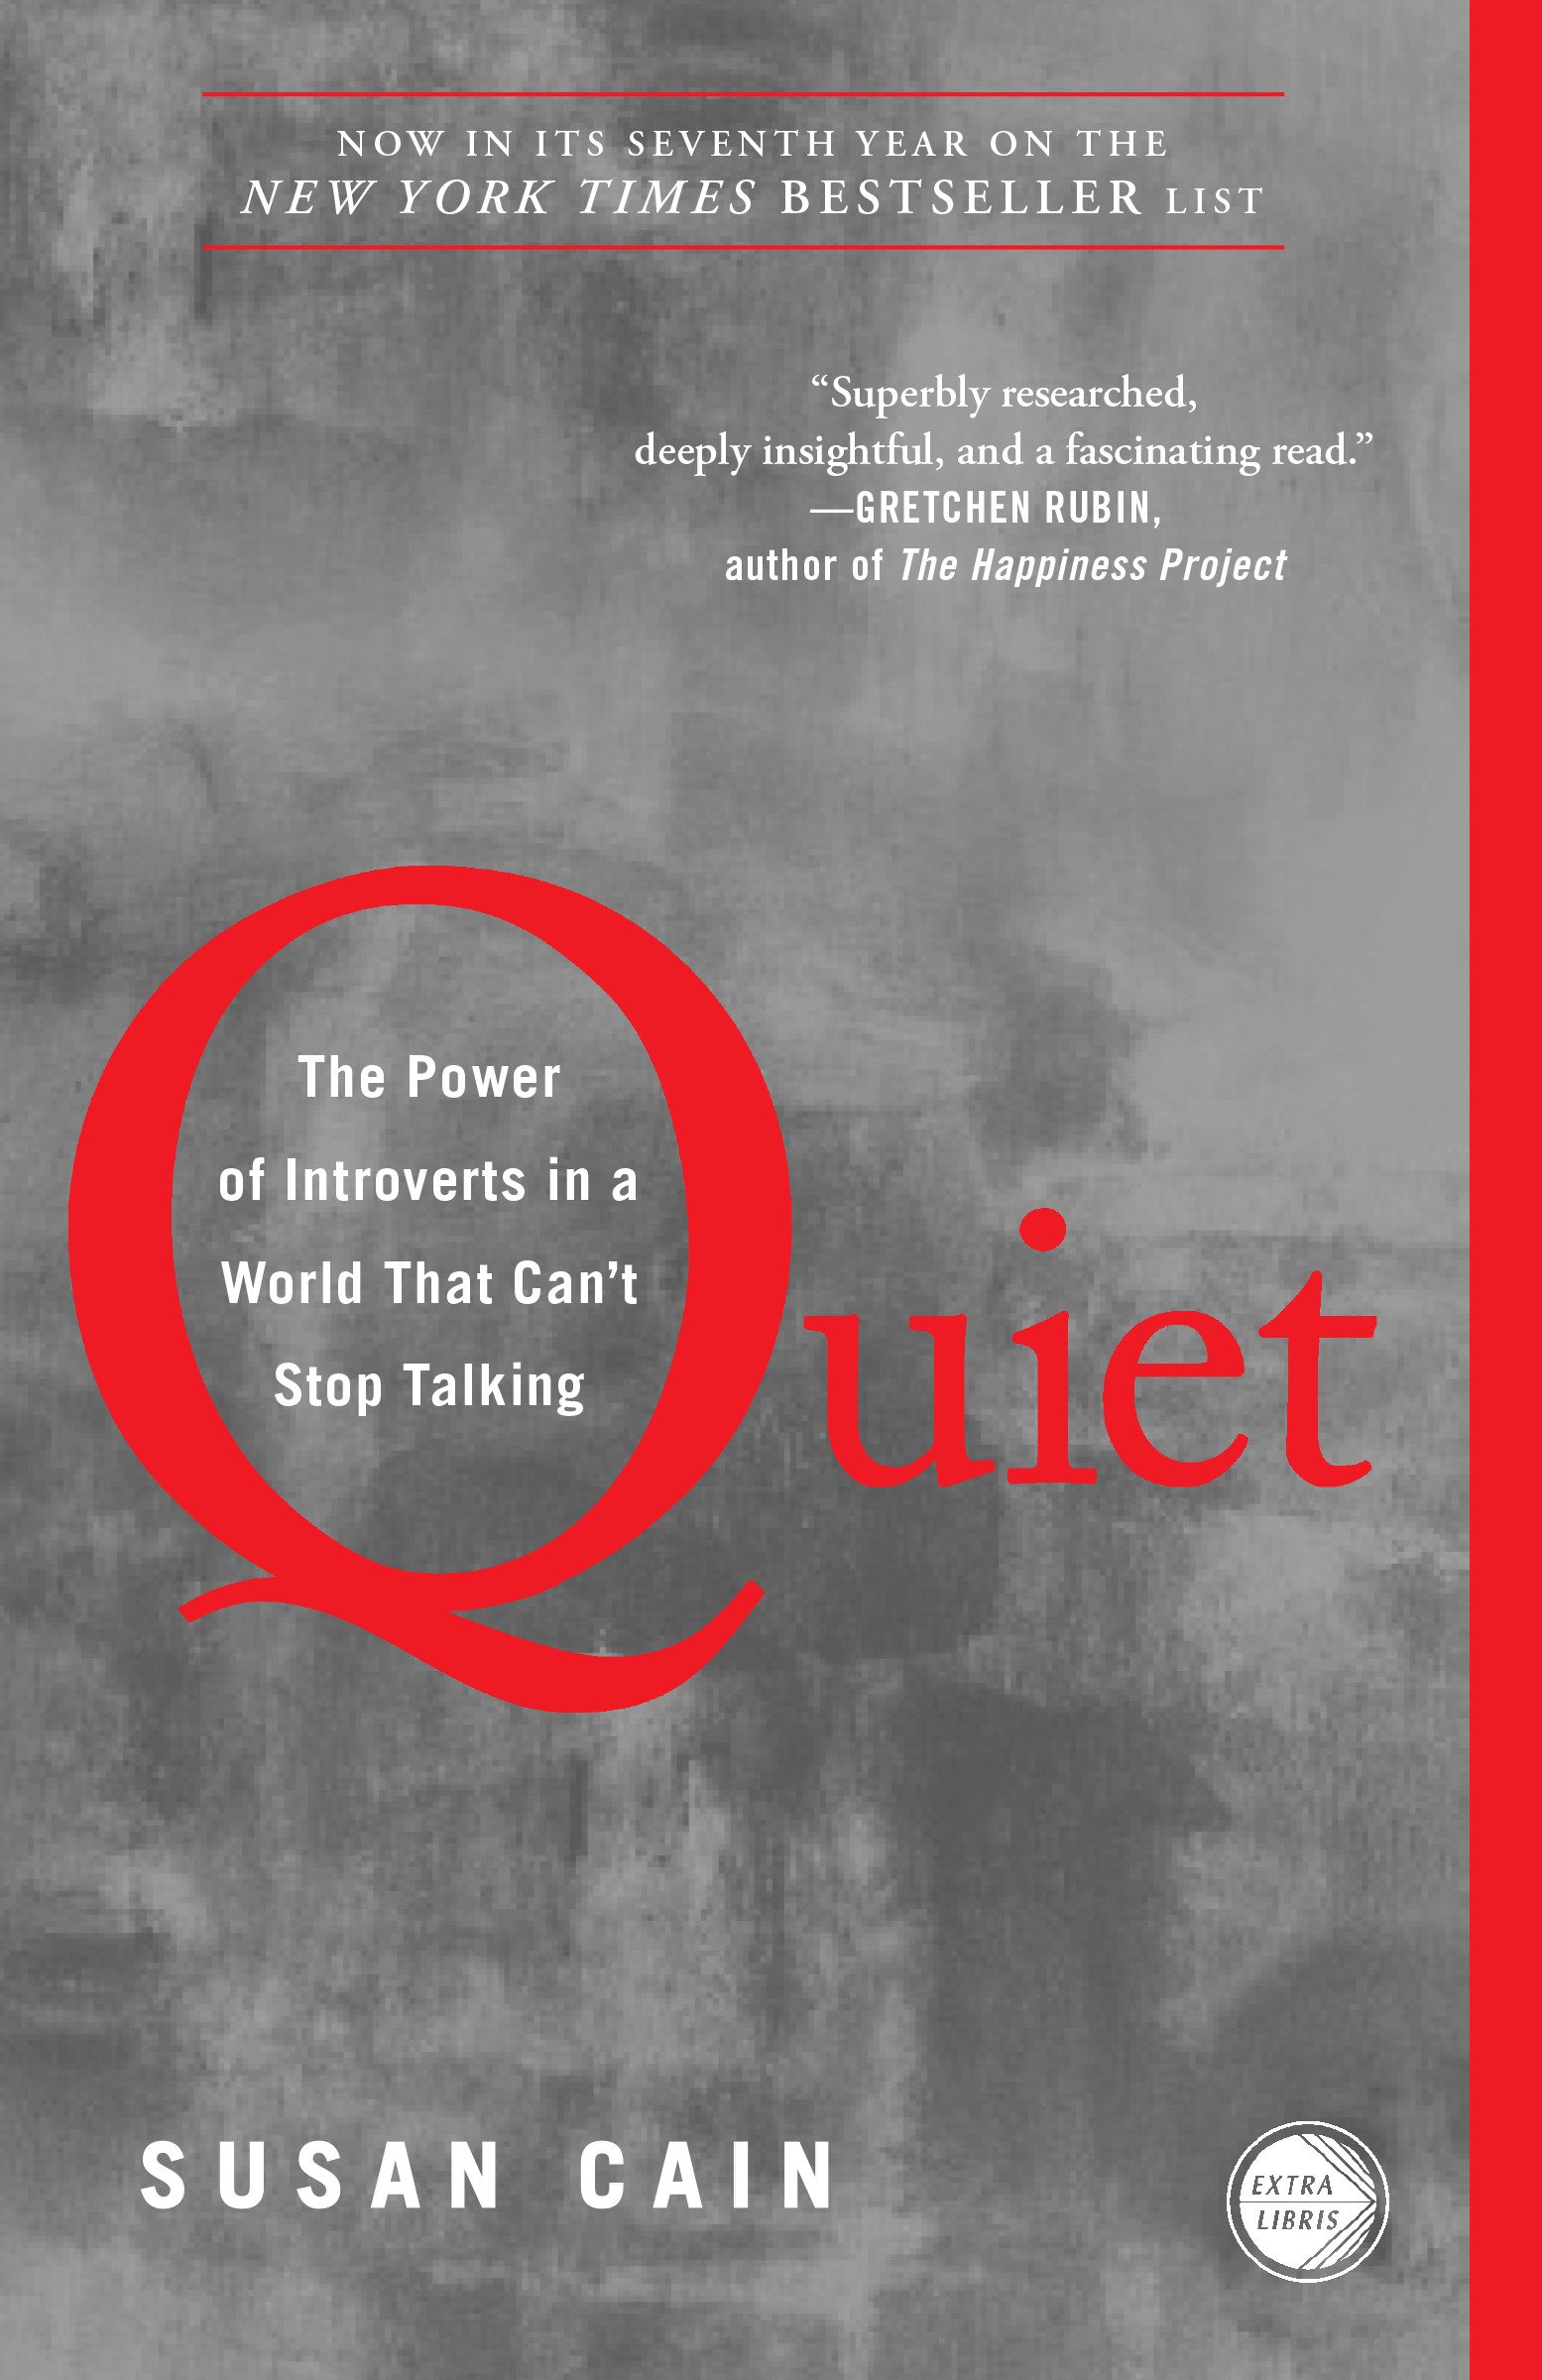 Quiet: The Power of Introverts in a World That Can't Stop Talking by Susan Cai